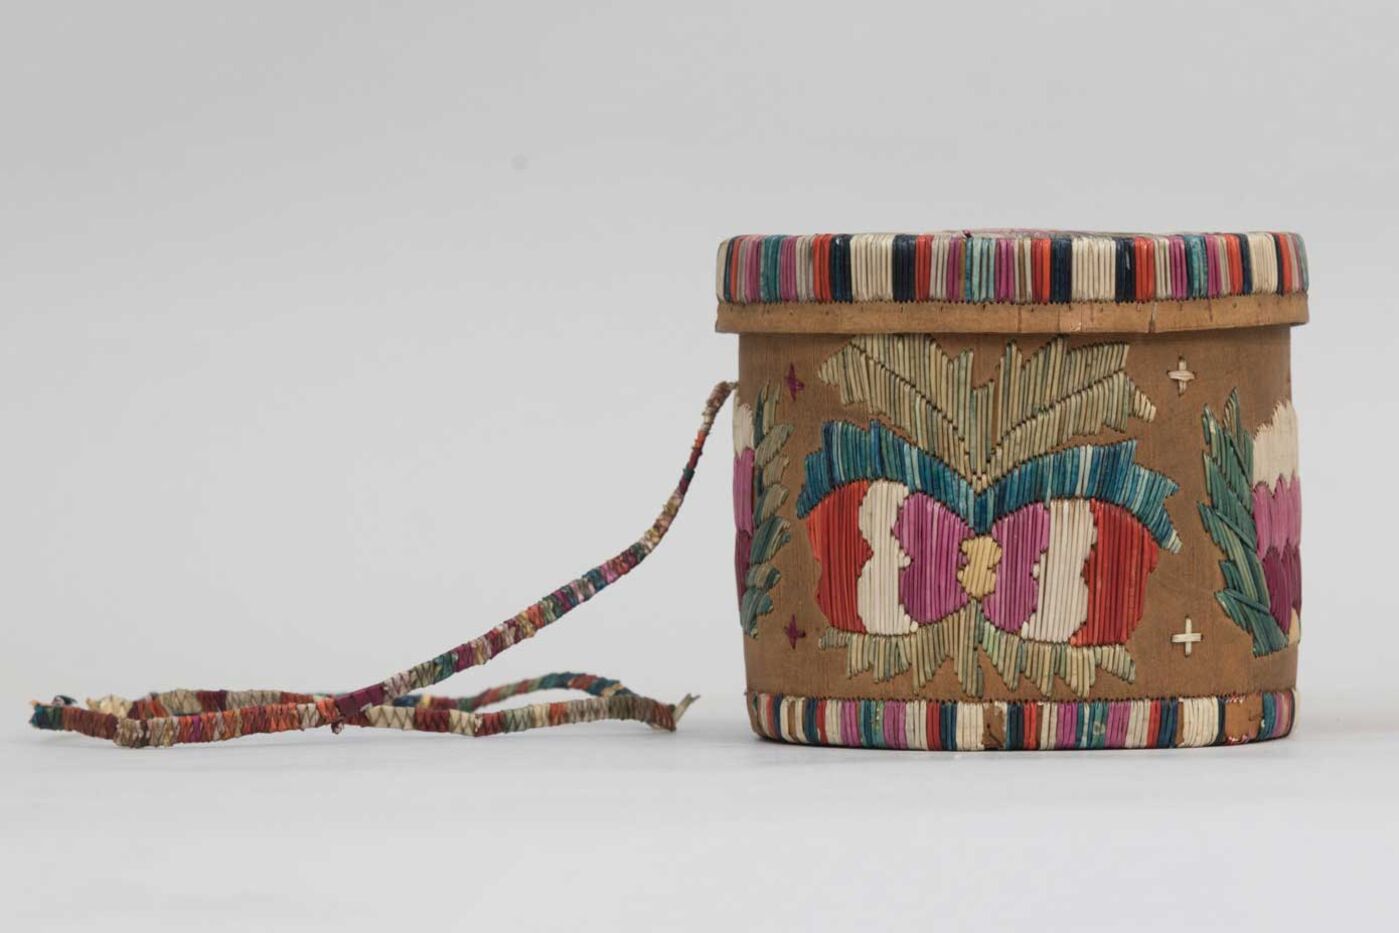 A birch bark basket, decorated with colorful quills.